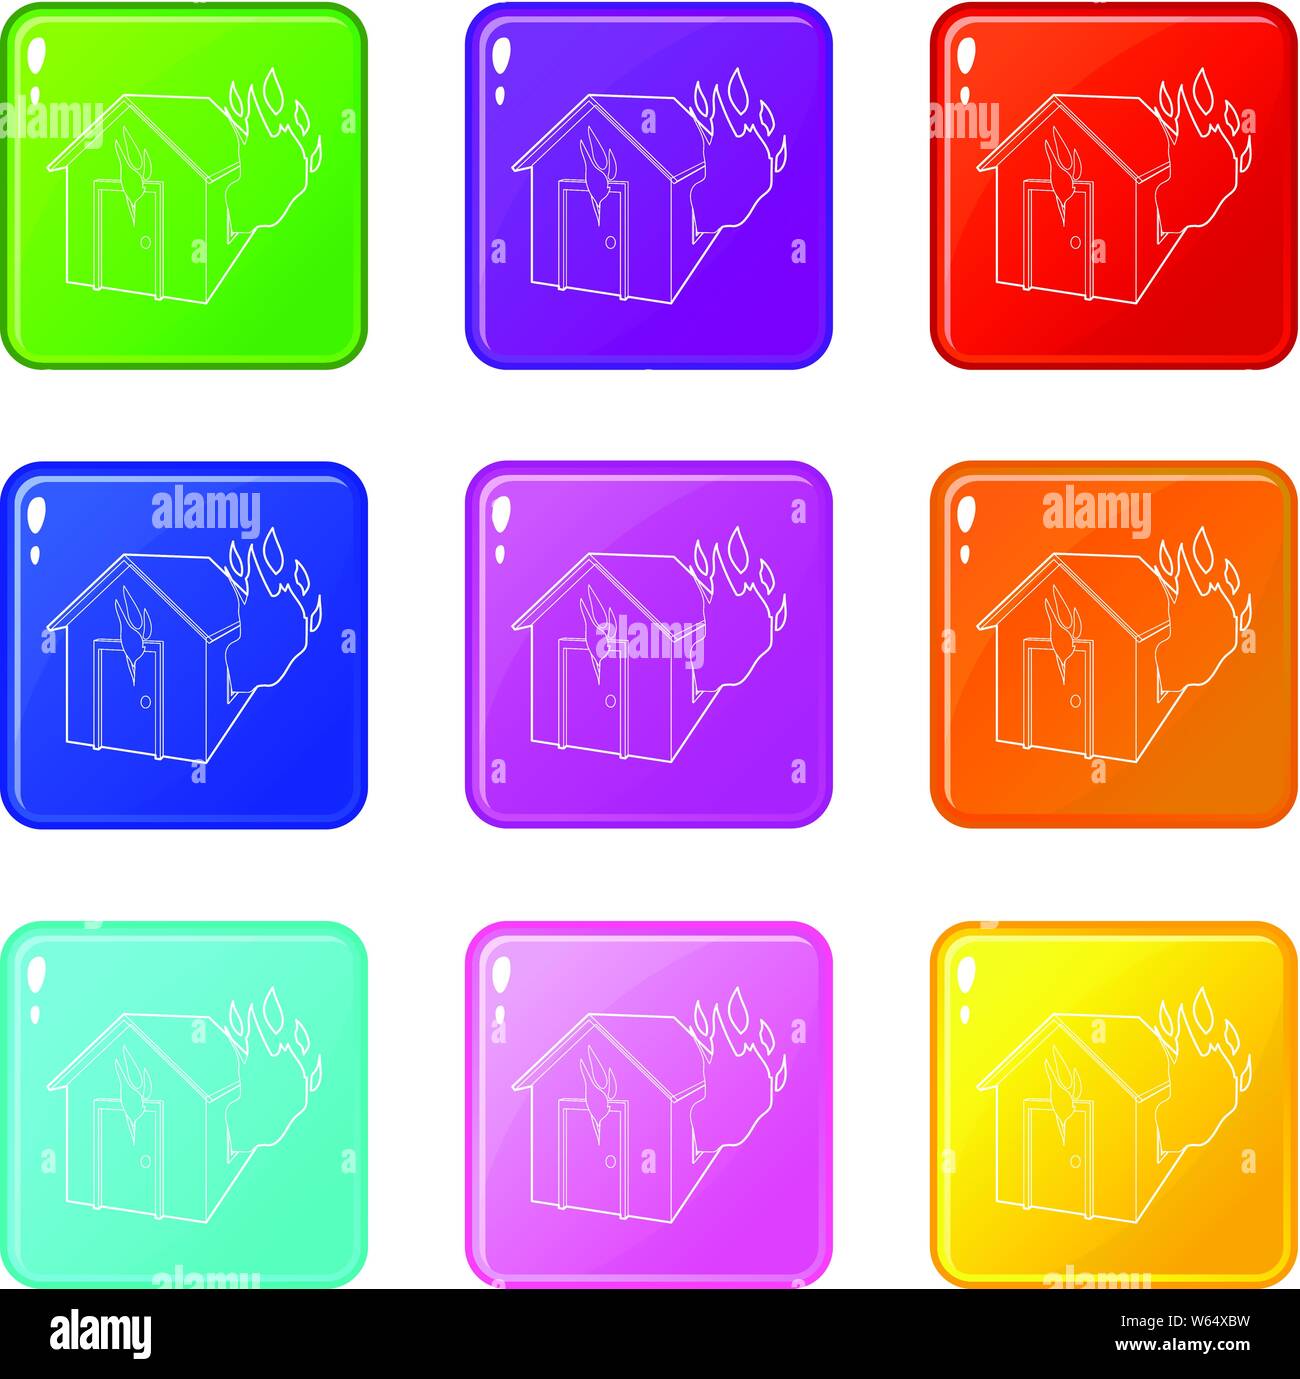 House on fire icons set 9 color collection Stock Vector